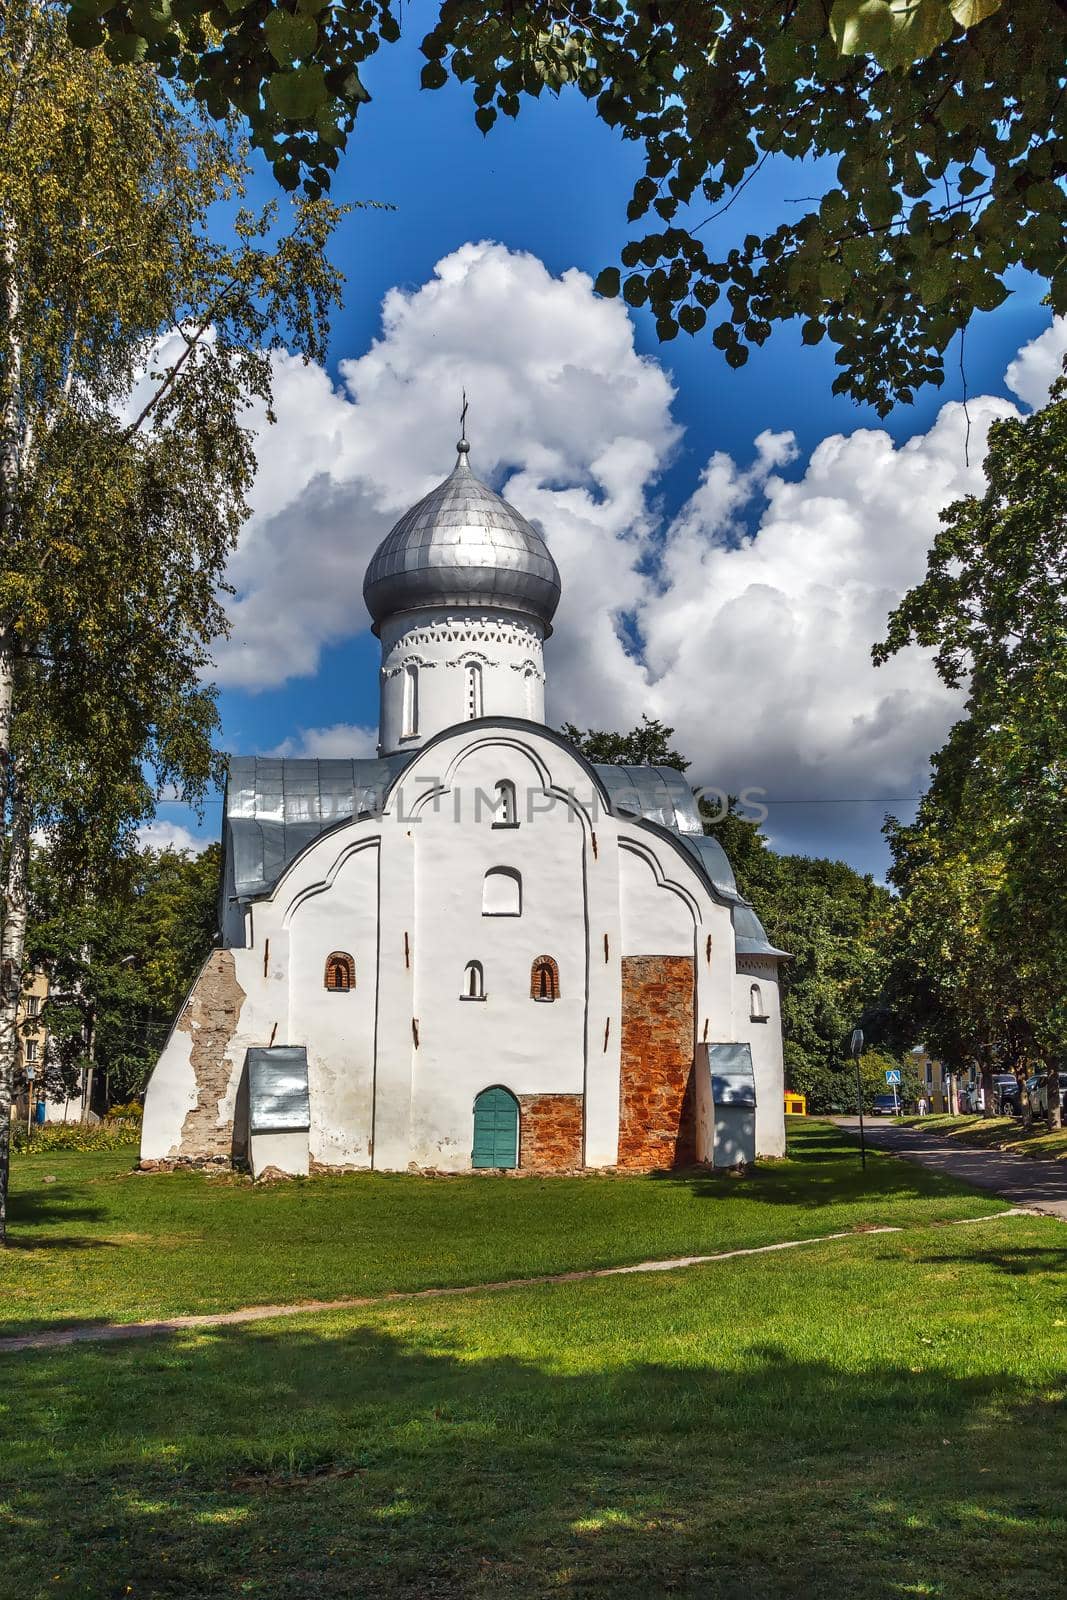 Church of St Vlasii is situated in the Centre of the Veliky Novgorod was built in 1407, Russia